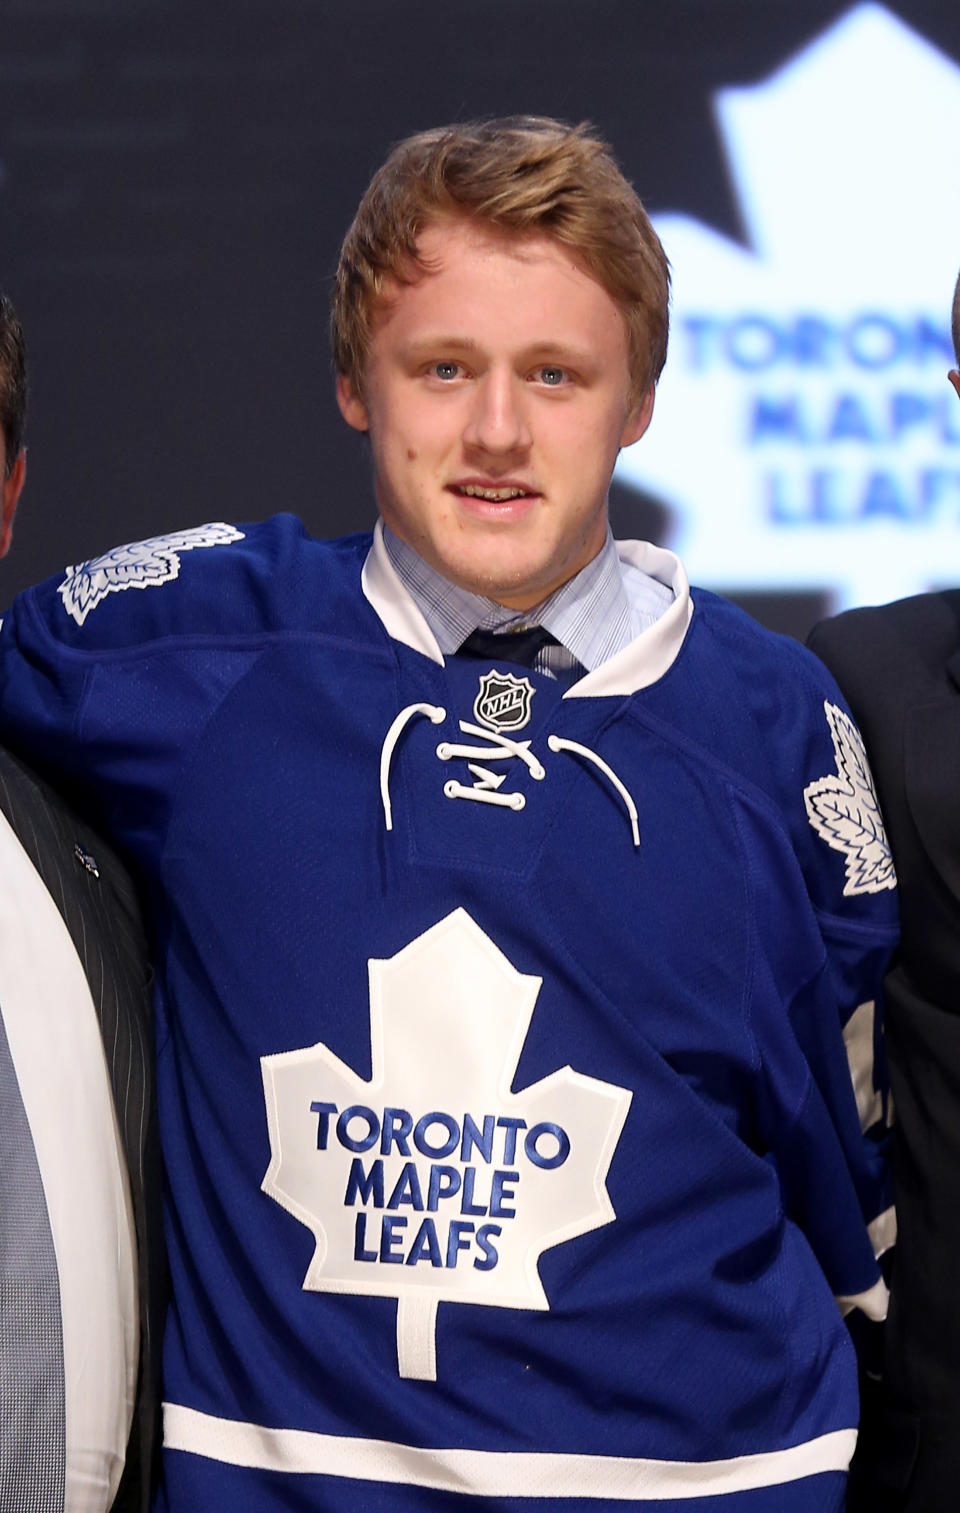 PITTSBURGH, PA - JUNE 22: Morgan Rielly, fifth overall pick by the Toronto Maple Leafs, poses on stage during Round One of the 2012 NHL Entry Draft at Consol Energy Center on June 22, 2012 in Pittsburgh, Pennsylvania. (Photo by Bruce Bennett/Getty Images)